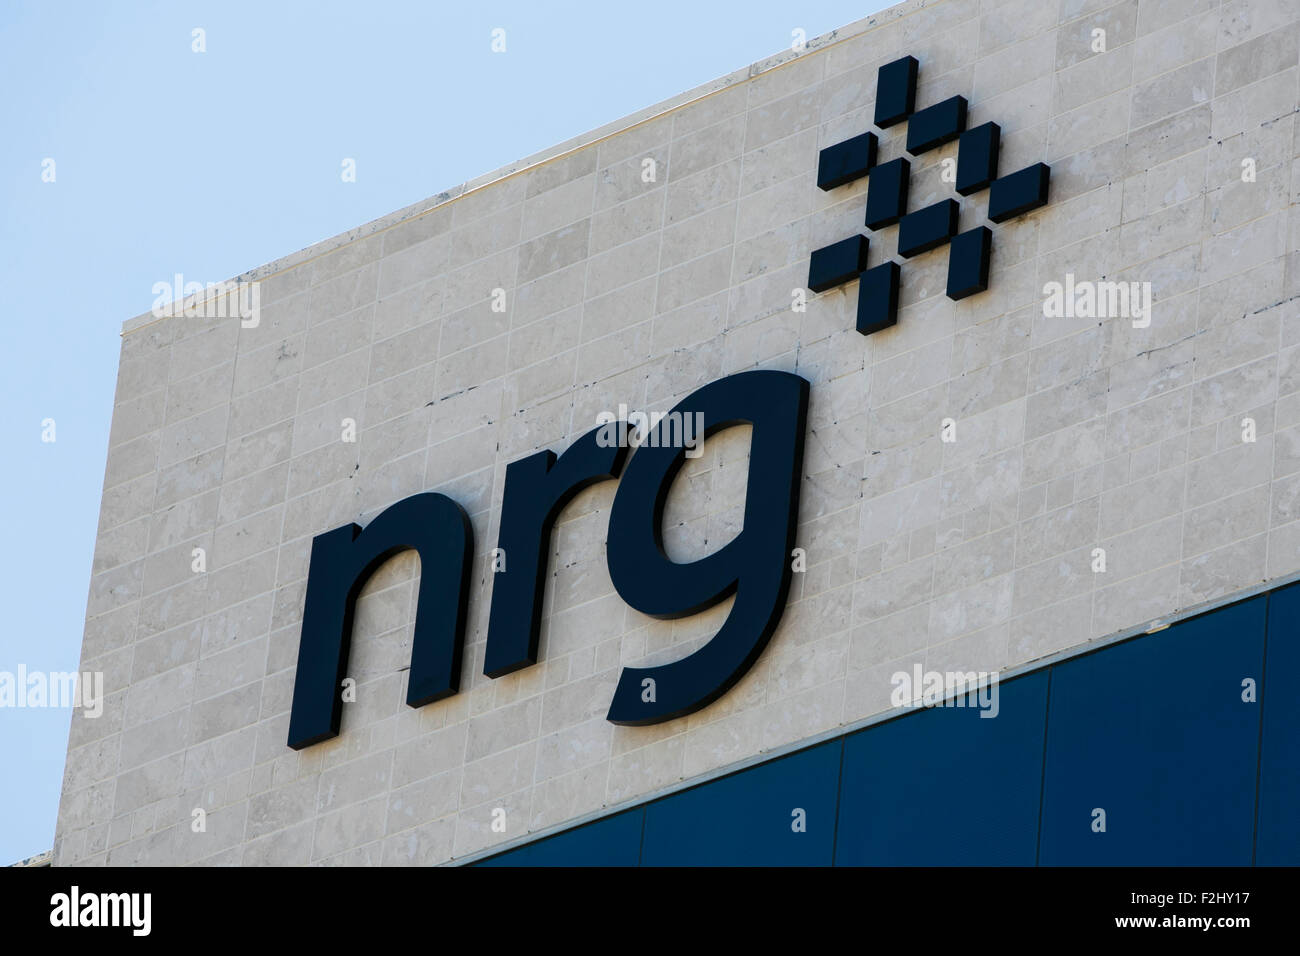 A logo sign outside of a facility occupied by NRG Energy, Inc., in Plano, Texas on September 12, 2015. Stock Photo